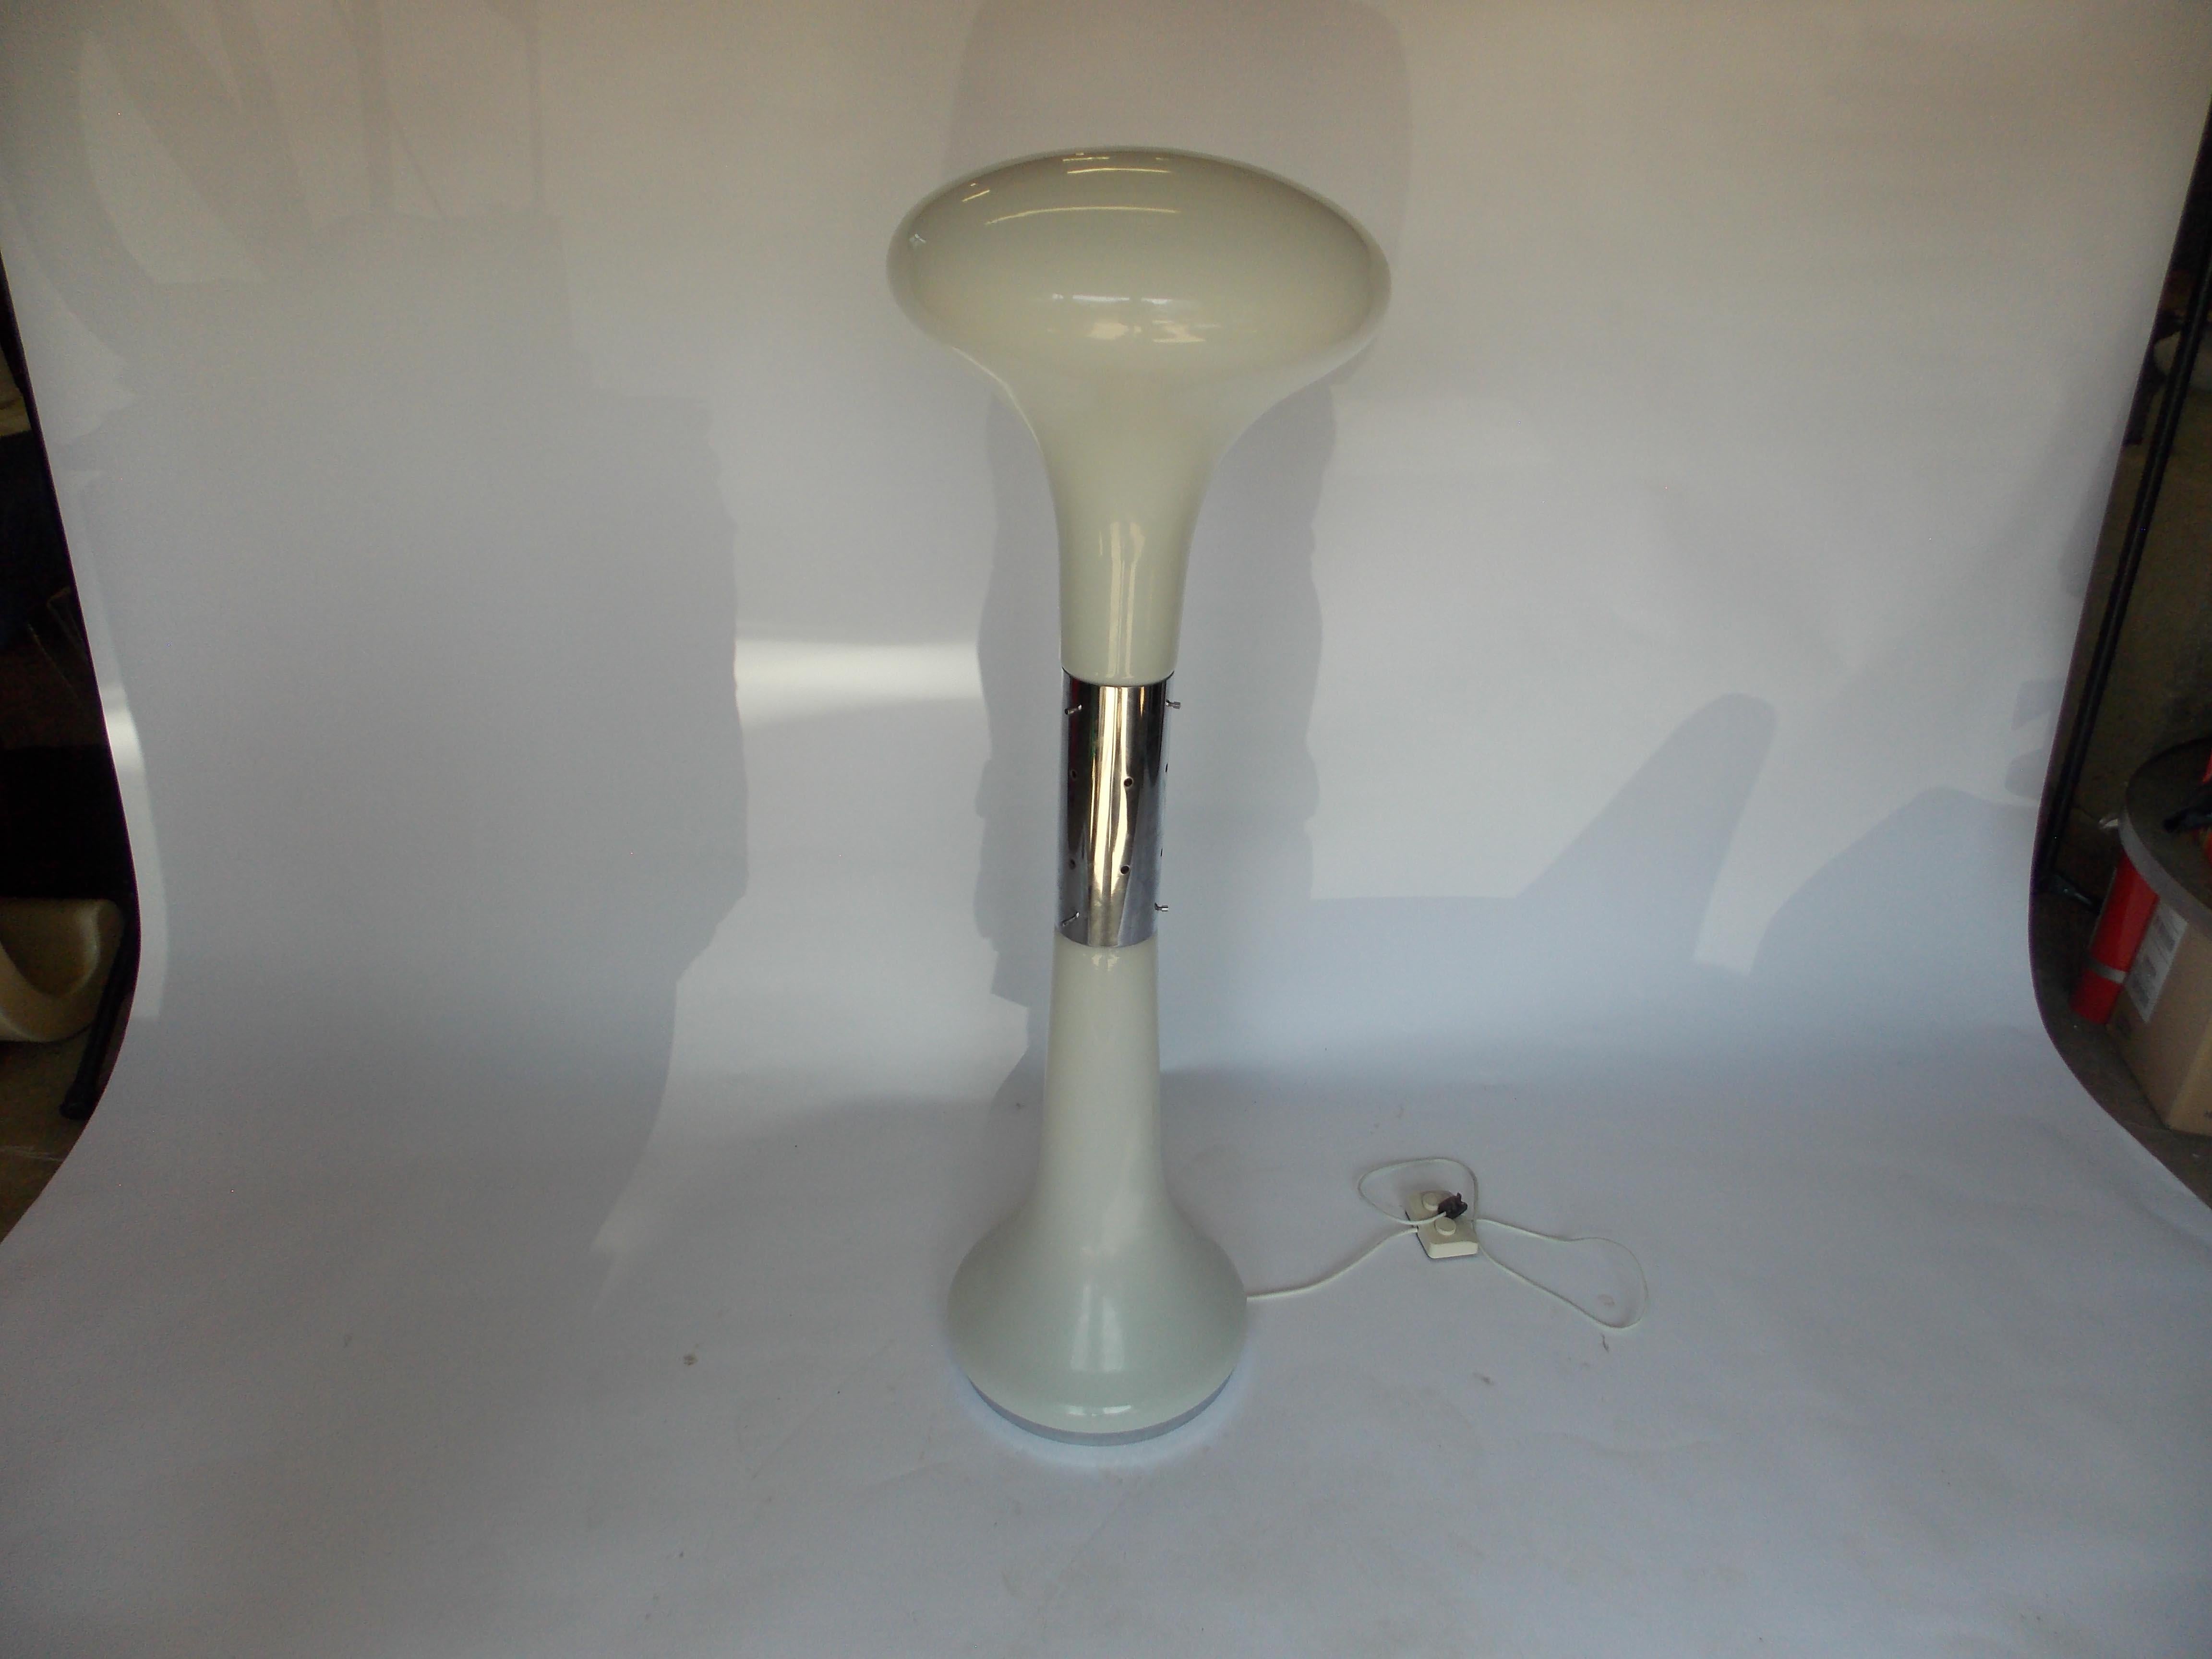 Vistosi Opaque White Glass Floor Lamp In Good Condition For Sale In West Palm Beach, FL